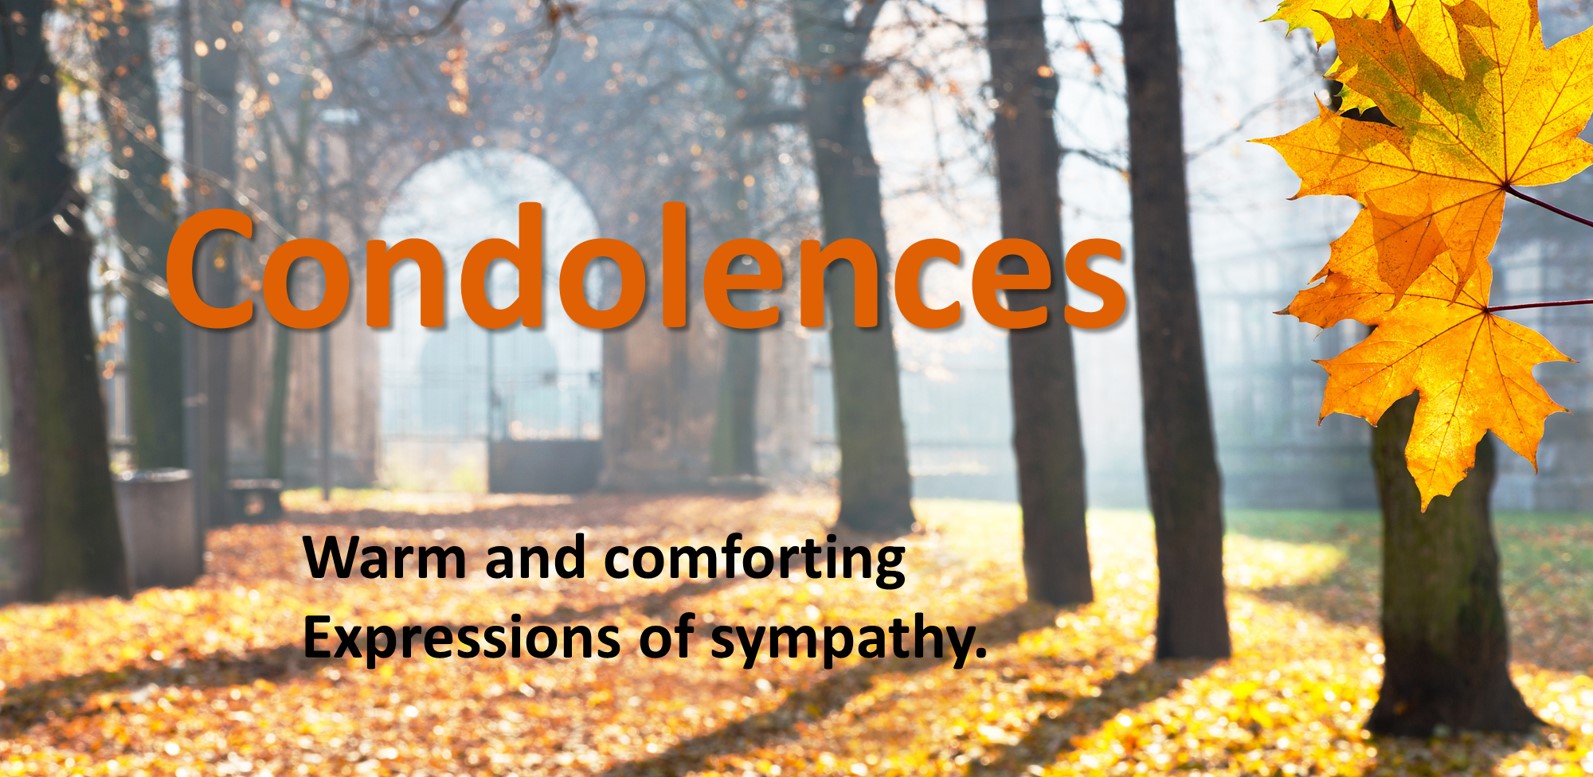 Condolences - Warm and comforting expressions of sympathy